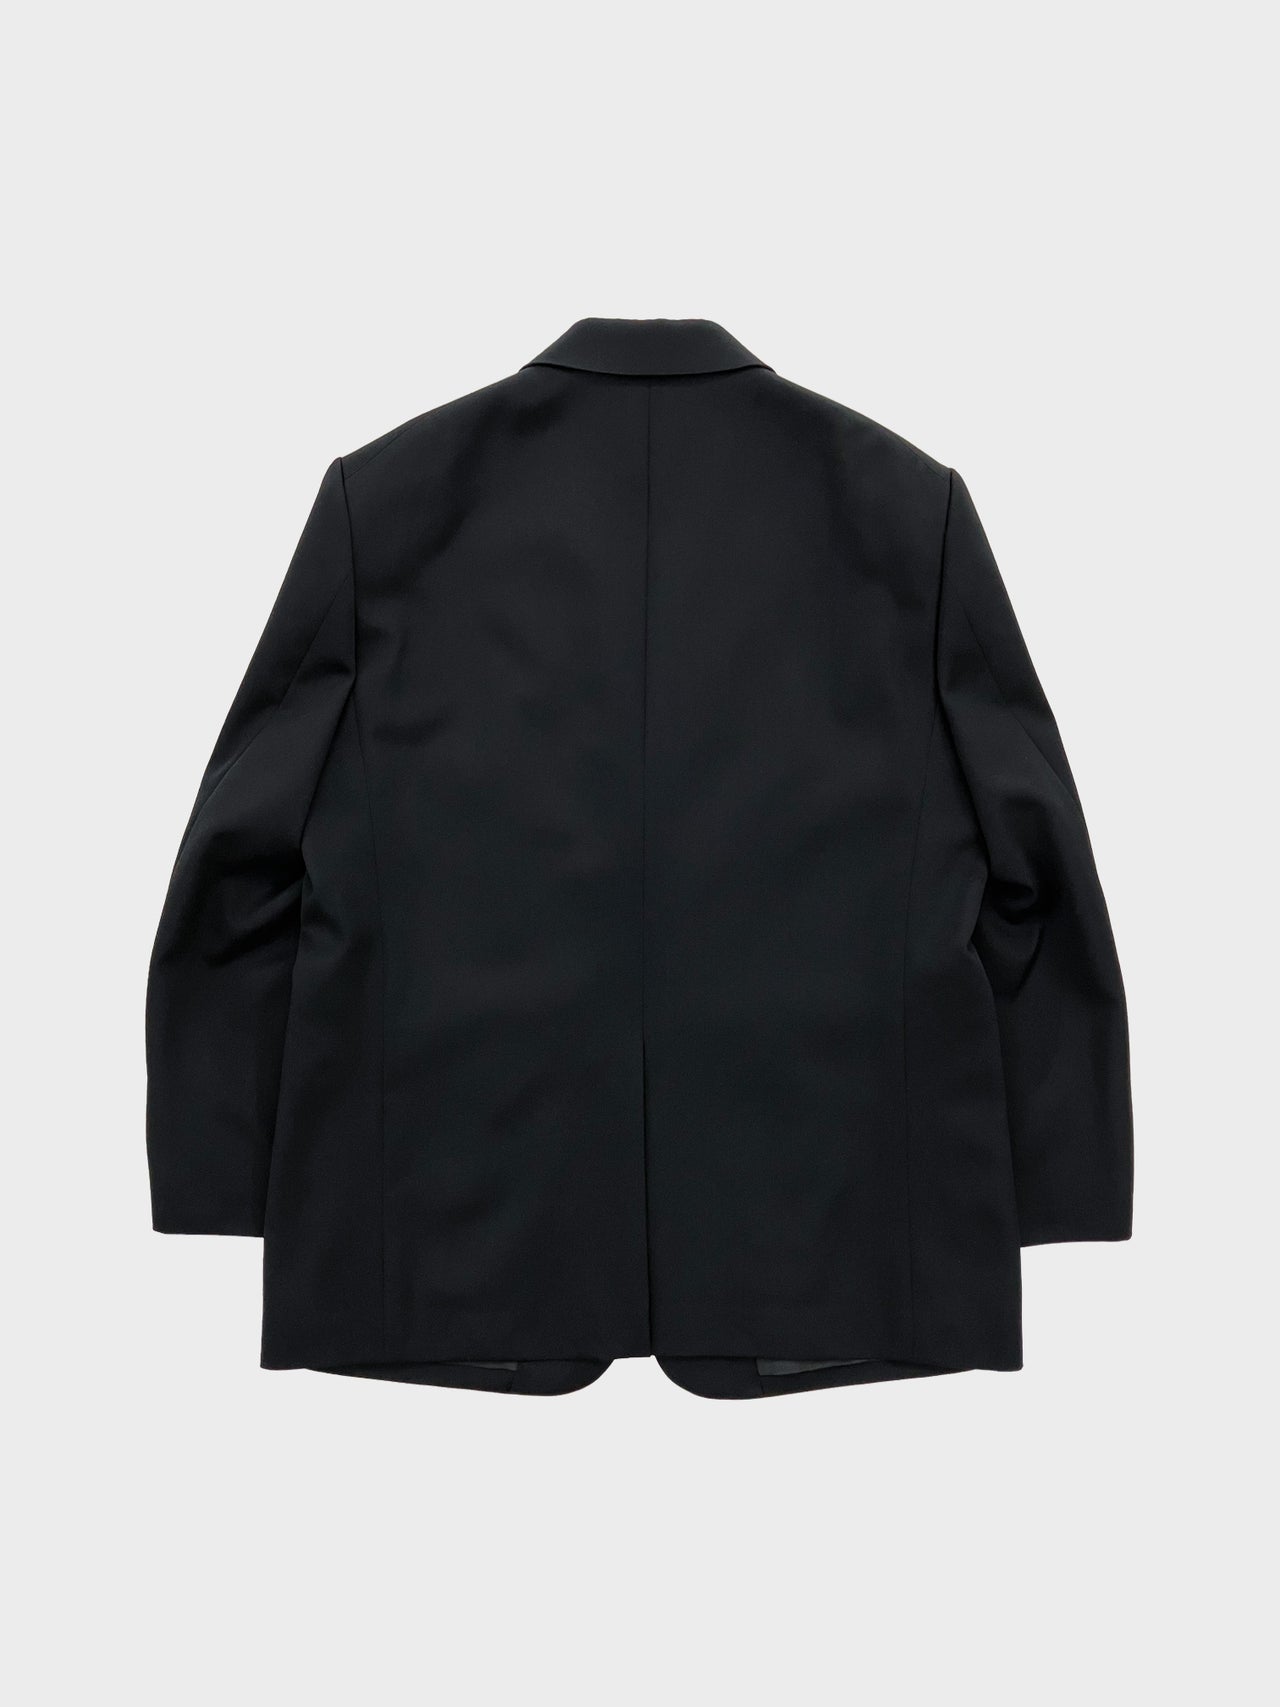 WEWILL /  TAILORED SQUARE JACKET (BLACK)